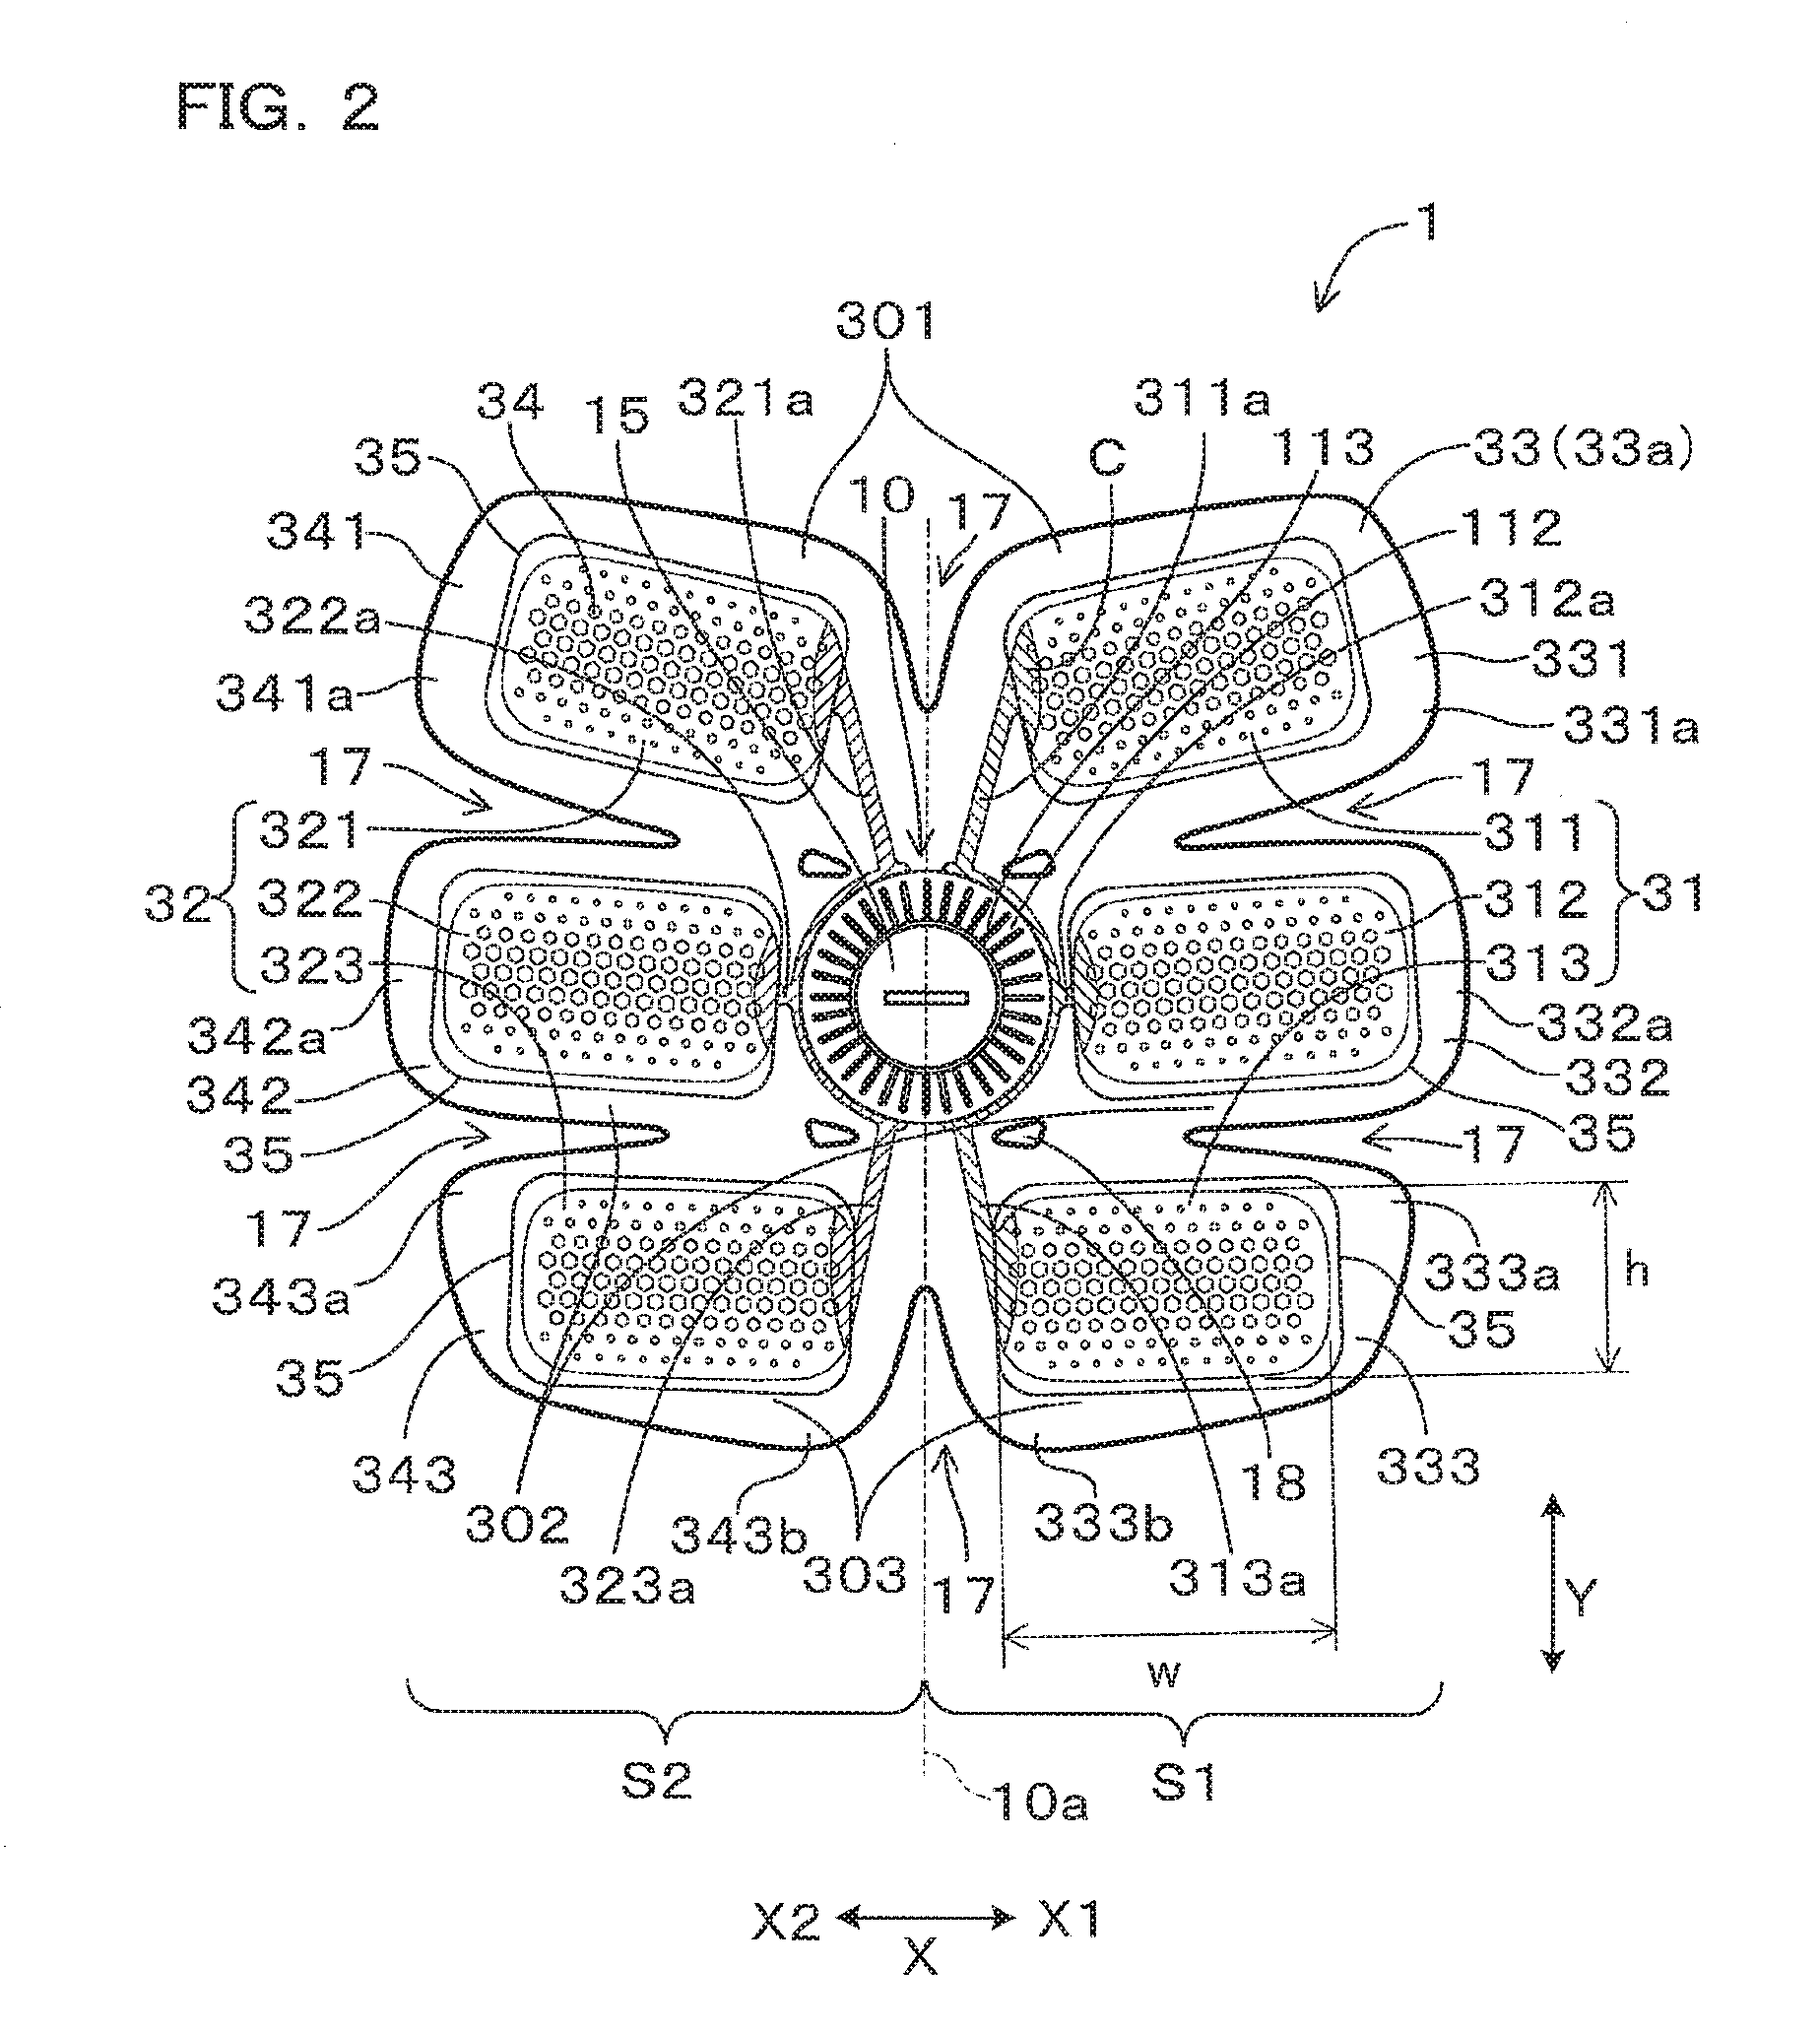 Electrical muscle stimulation device